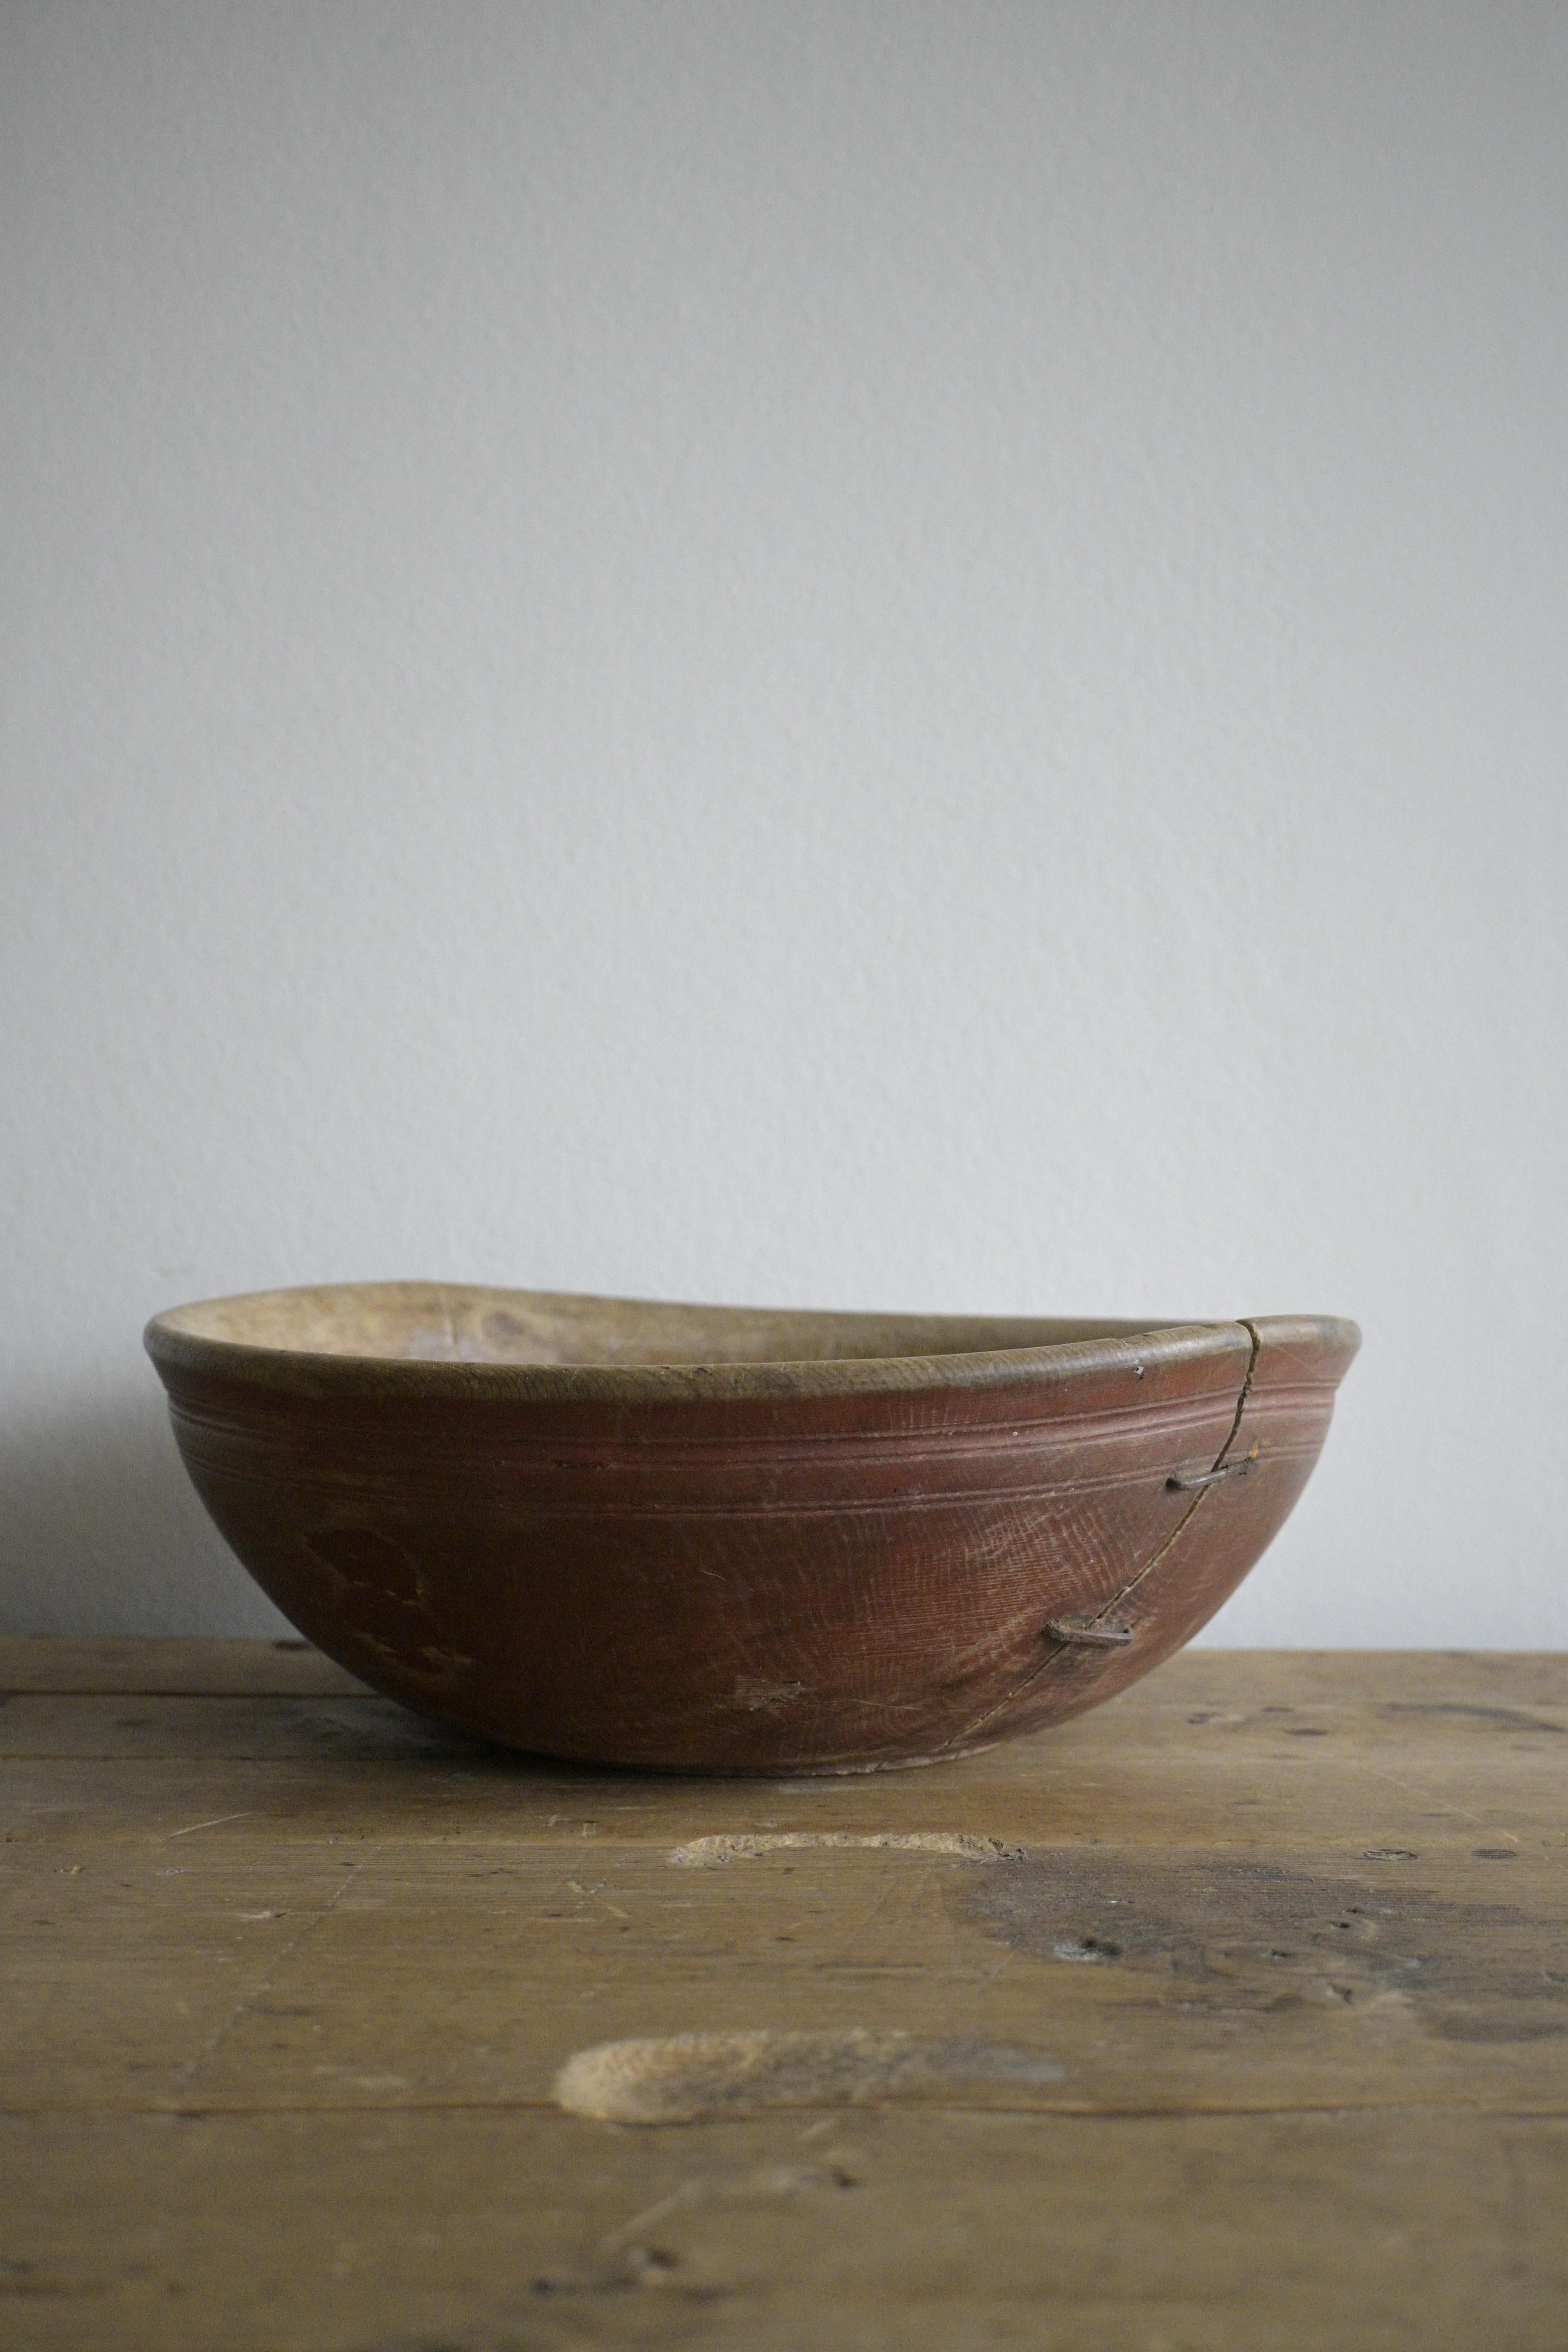 Swedish turned wood bowl ca 1830-1860

With a smooth surfuce and beautiful patina.
Repaired with old metal braces

Made out of birch wood.

Height: 10 cm/3.9 inch
Diameter: 29 cm/11.4 inch